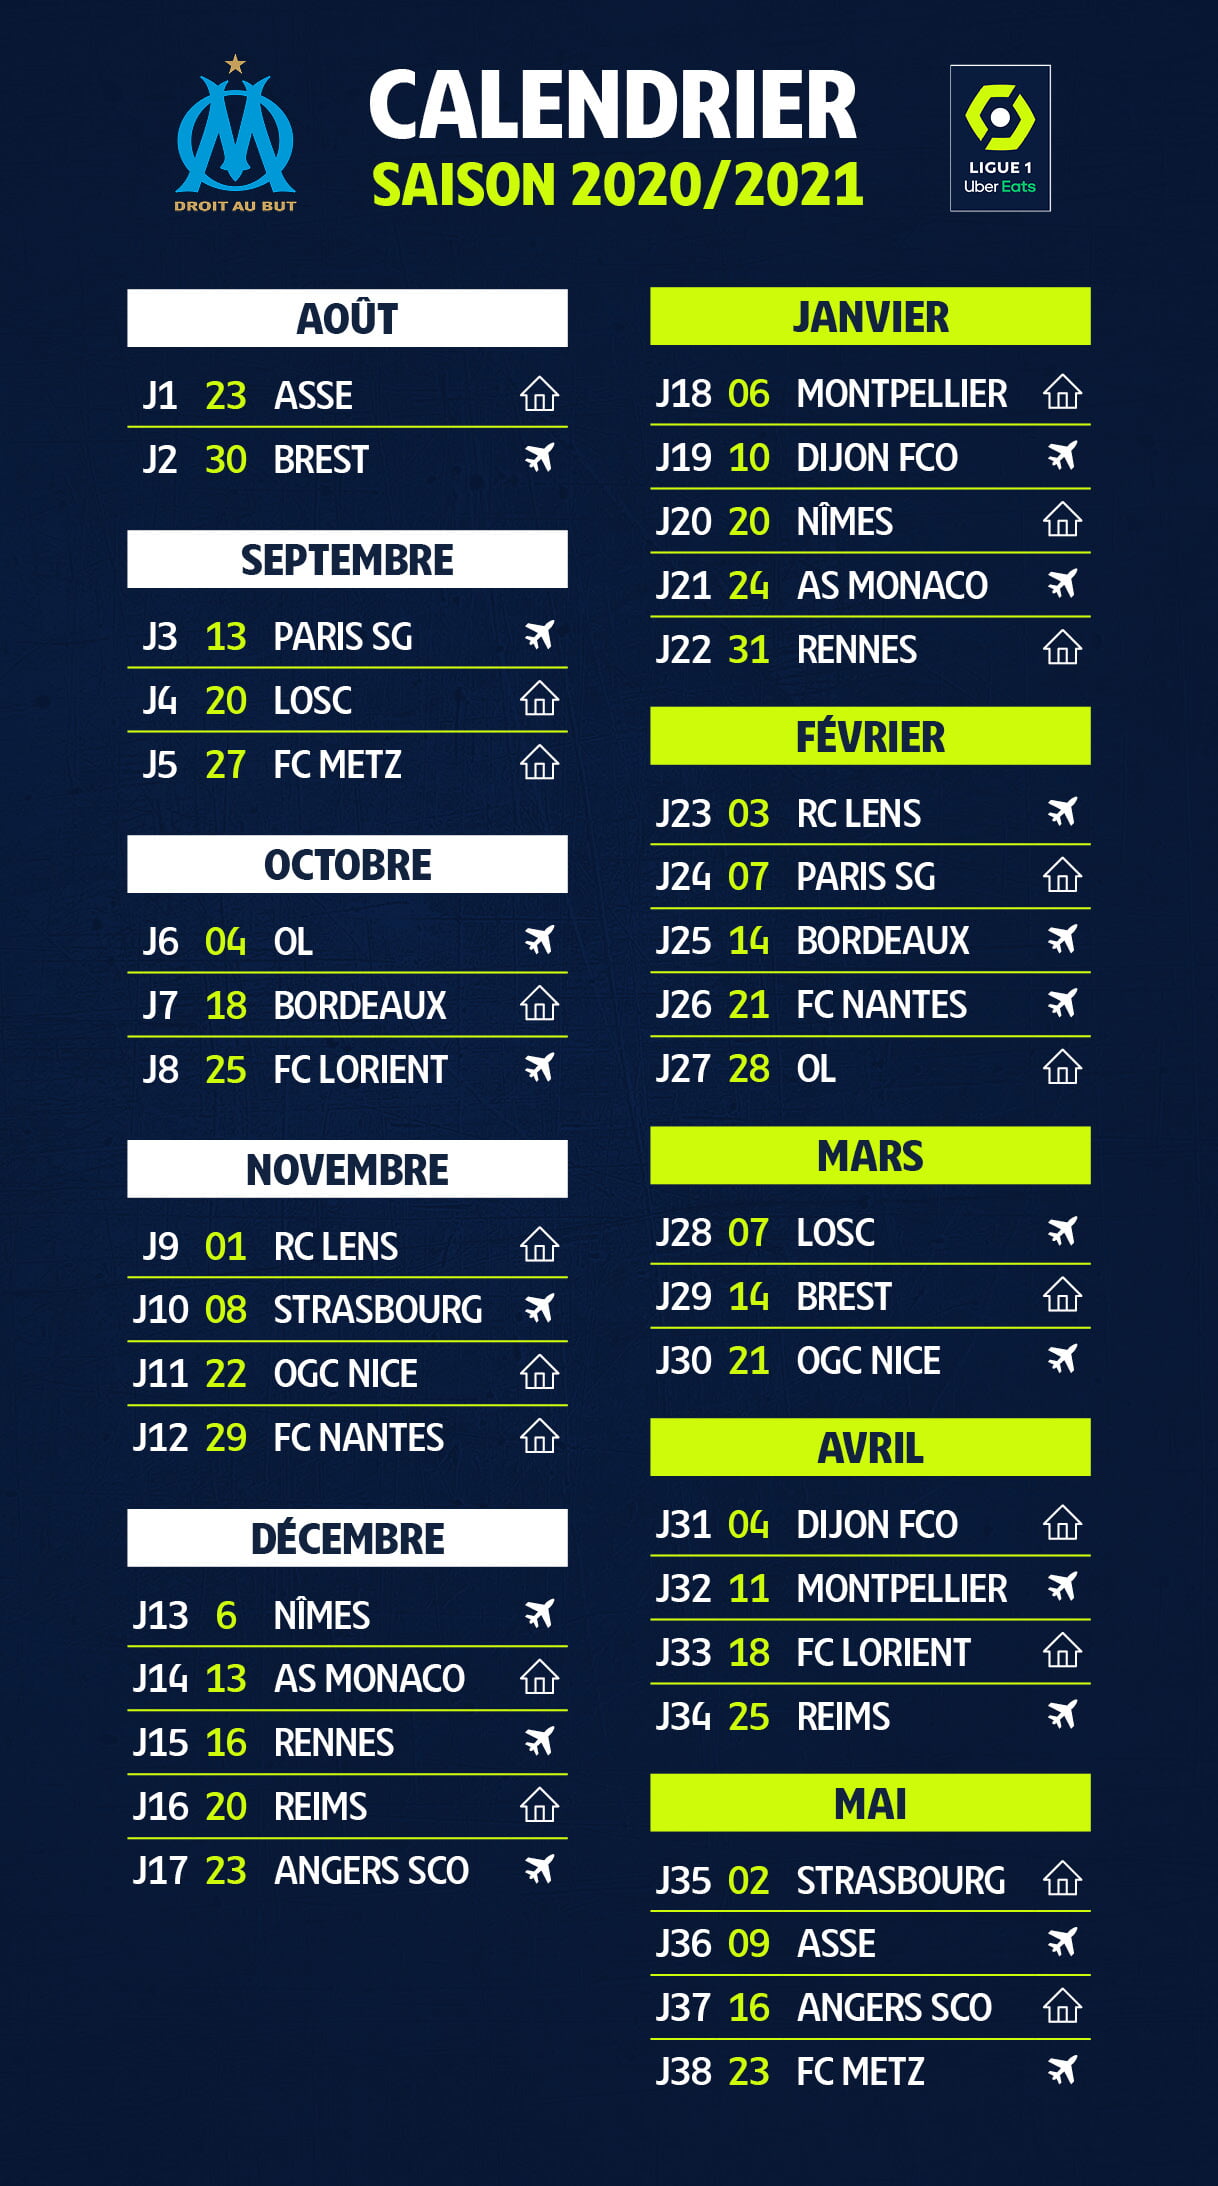 OM : Le calendrier 2020/21